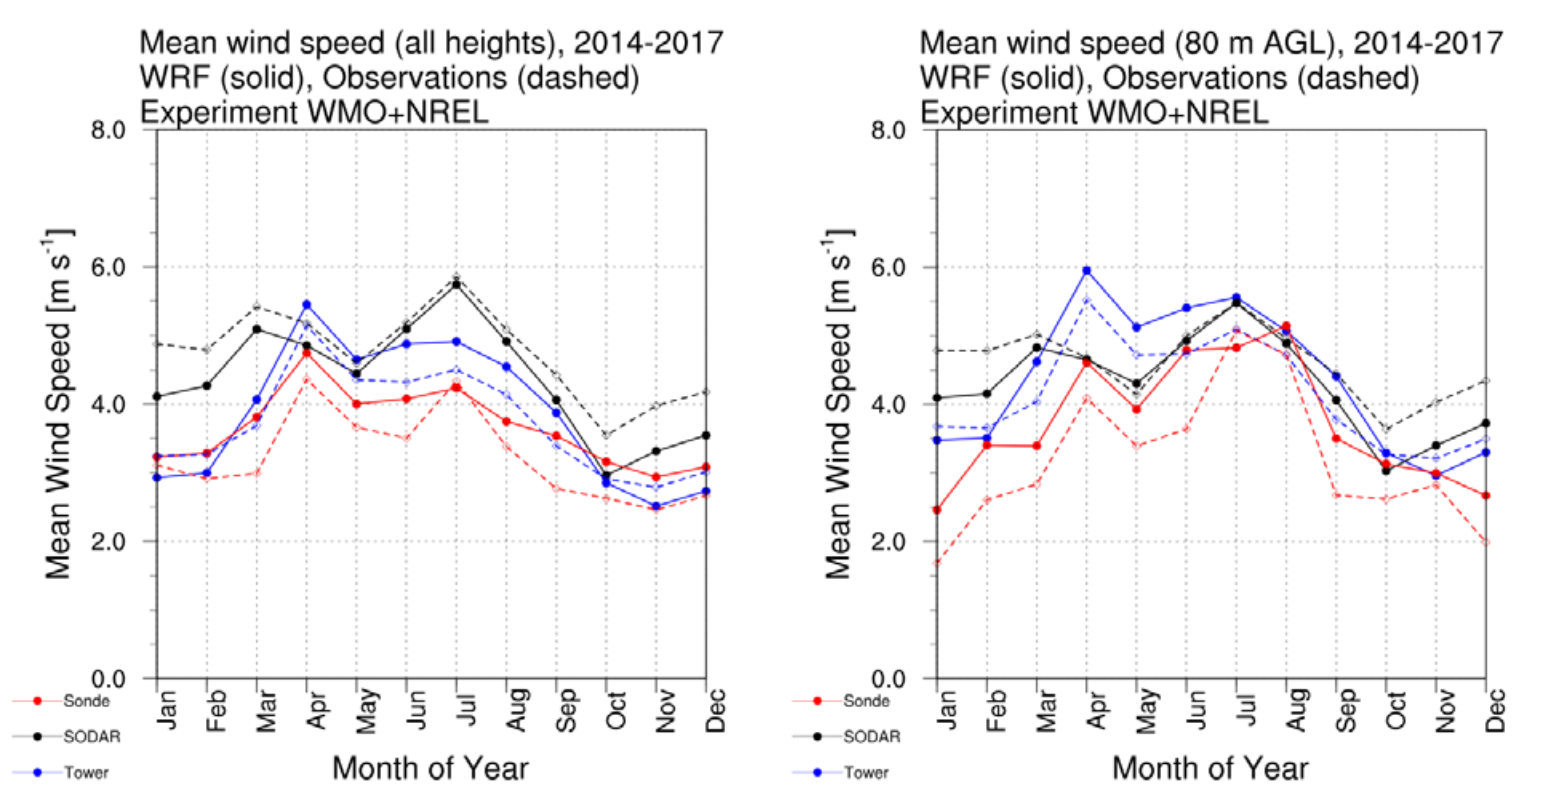 Mean wind speed data from Bangladesh study